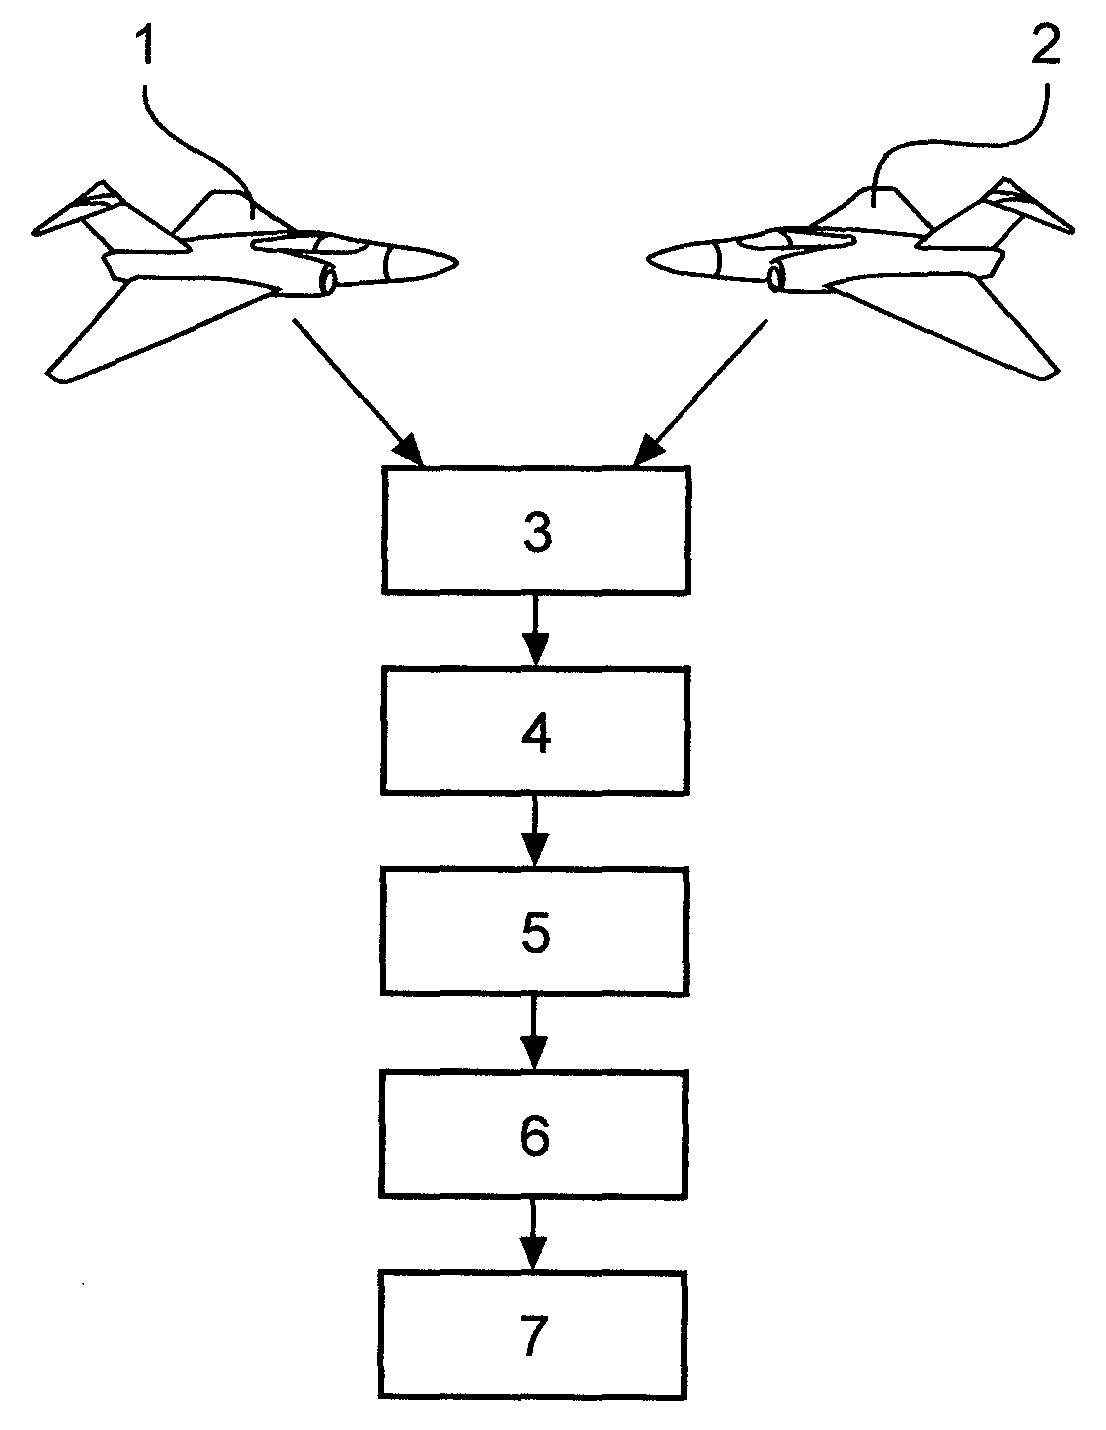 Method for duel handling in a combat aircraft